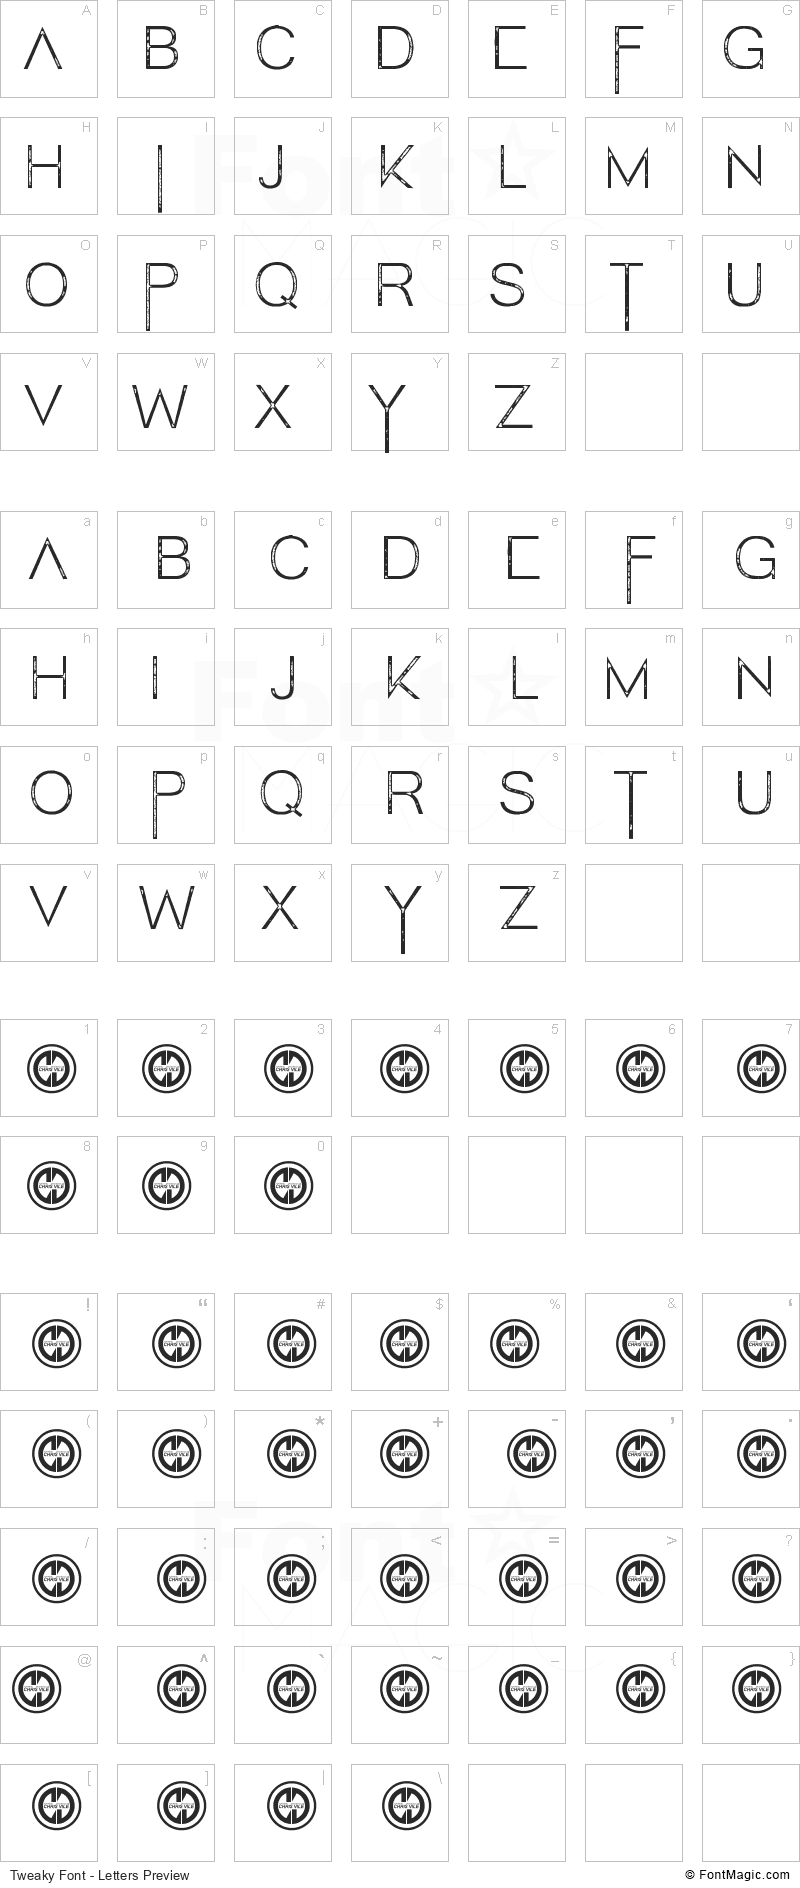 Tweaky Font - All Latters Preview Chart